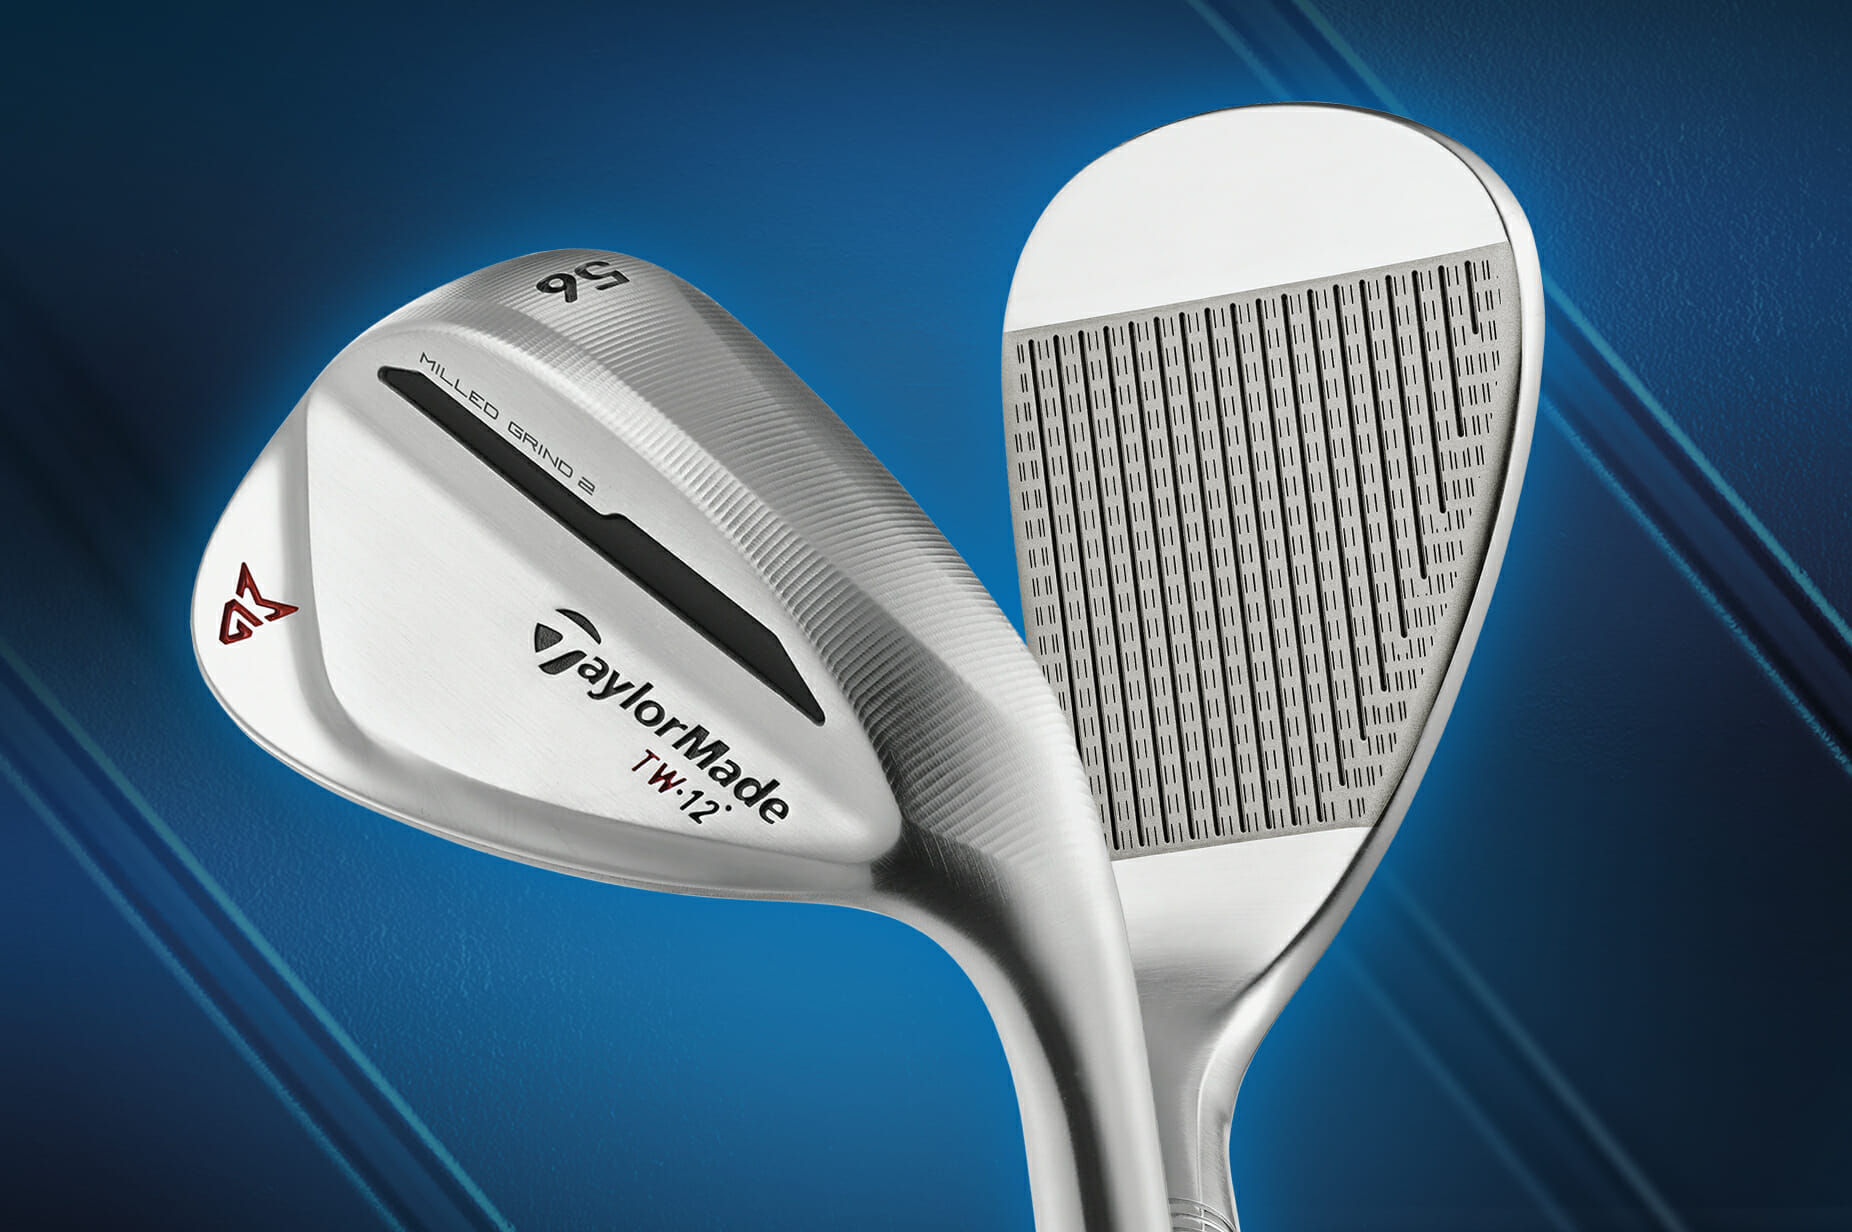 Special edition Tiger wedge added to Taylormade’s MG2 line-up